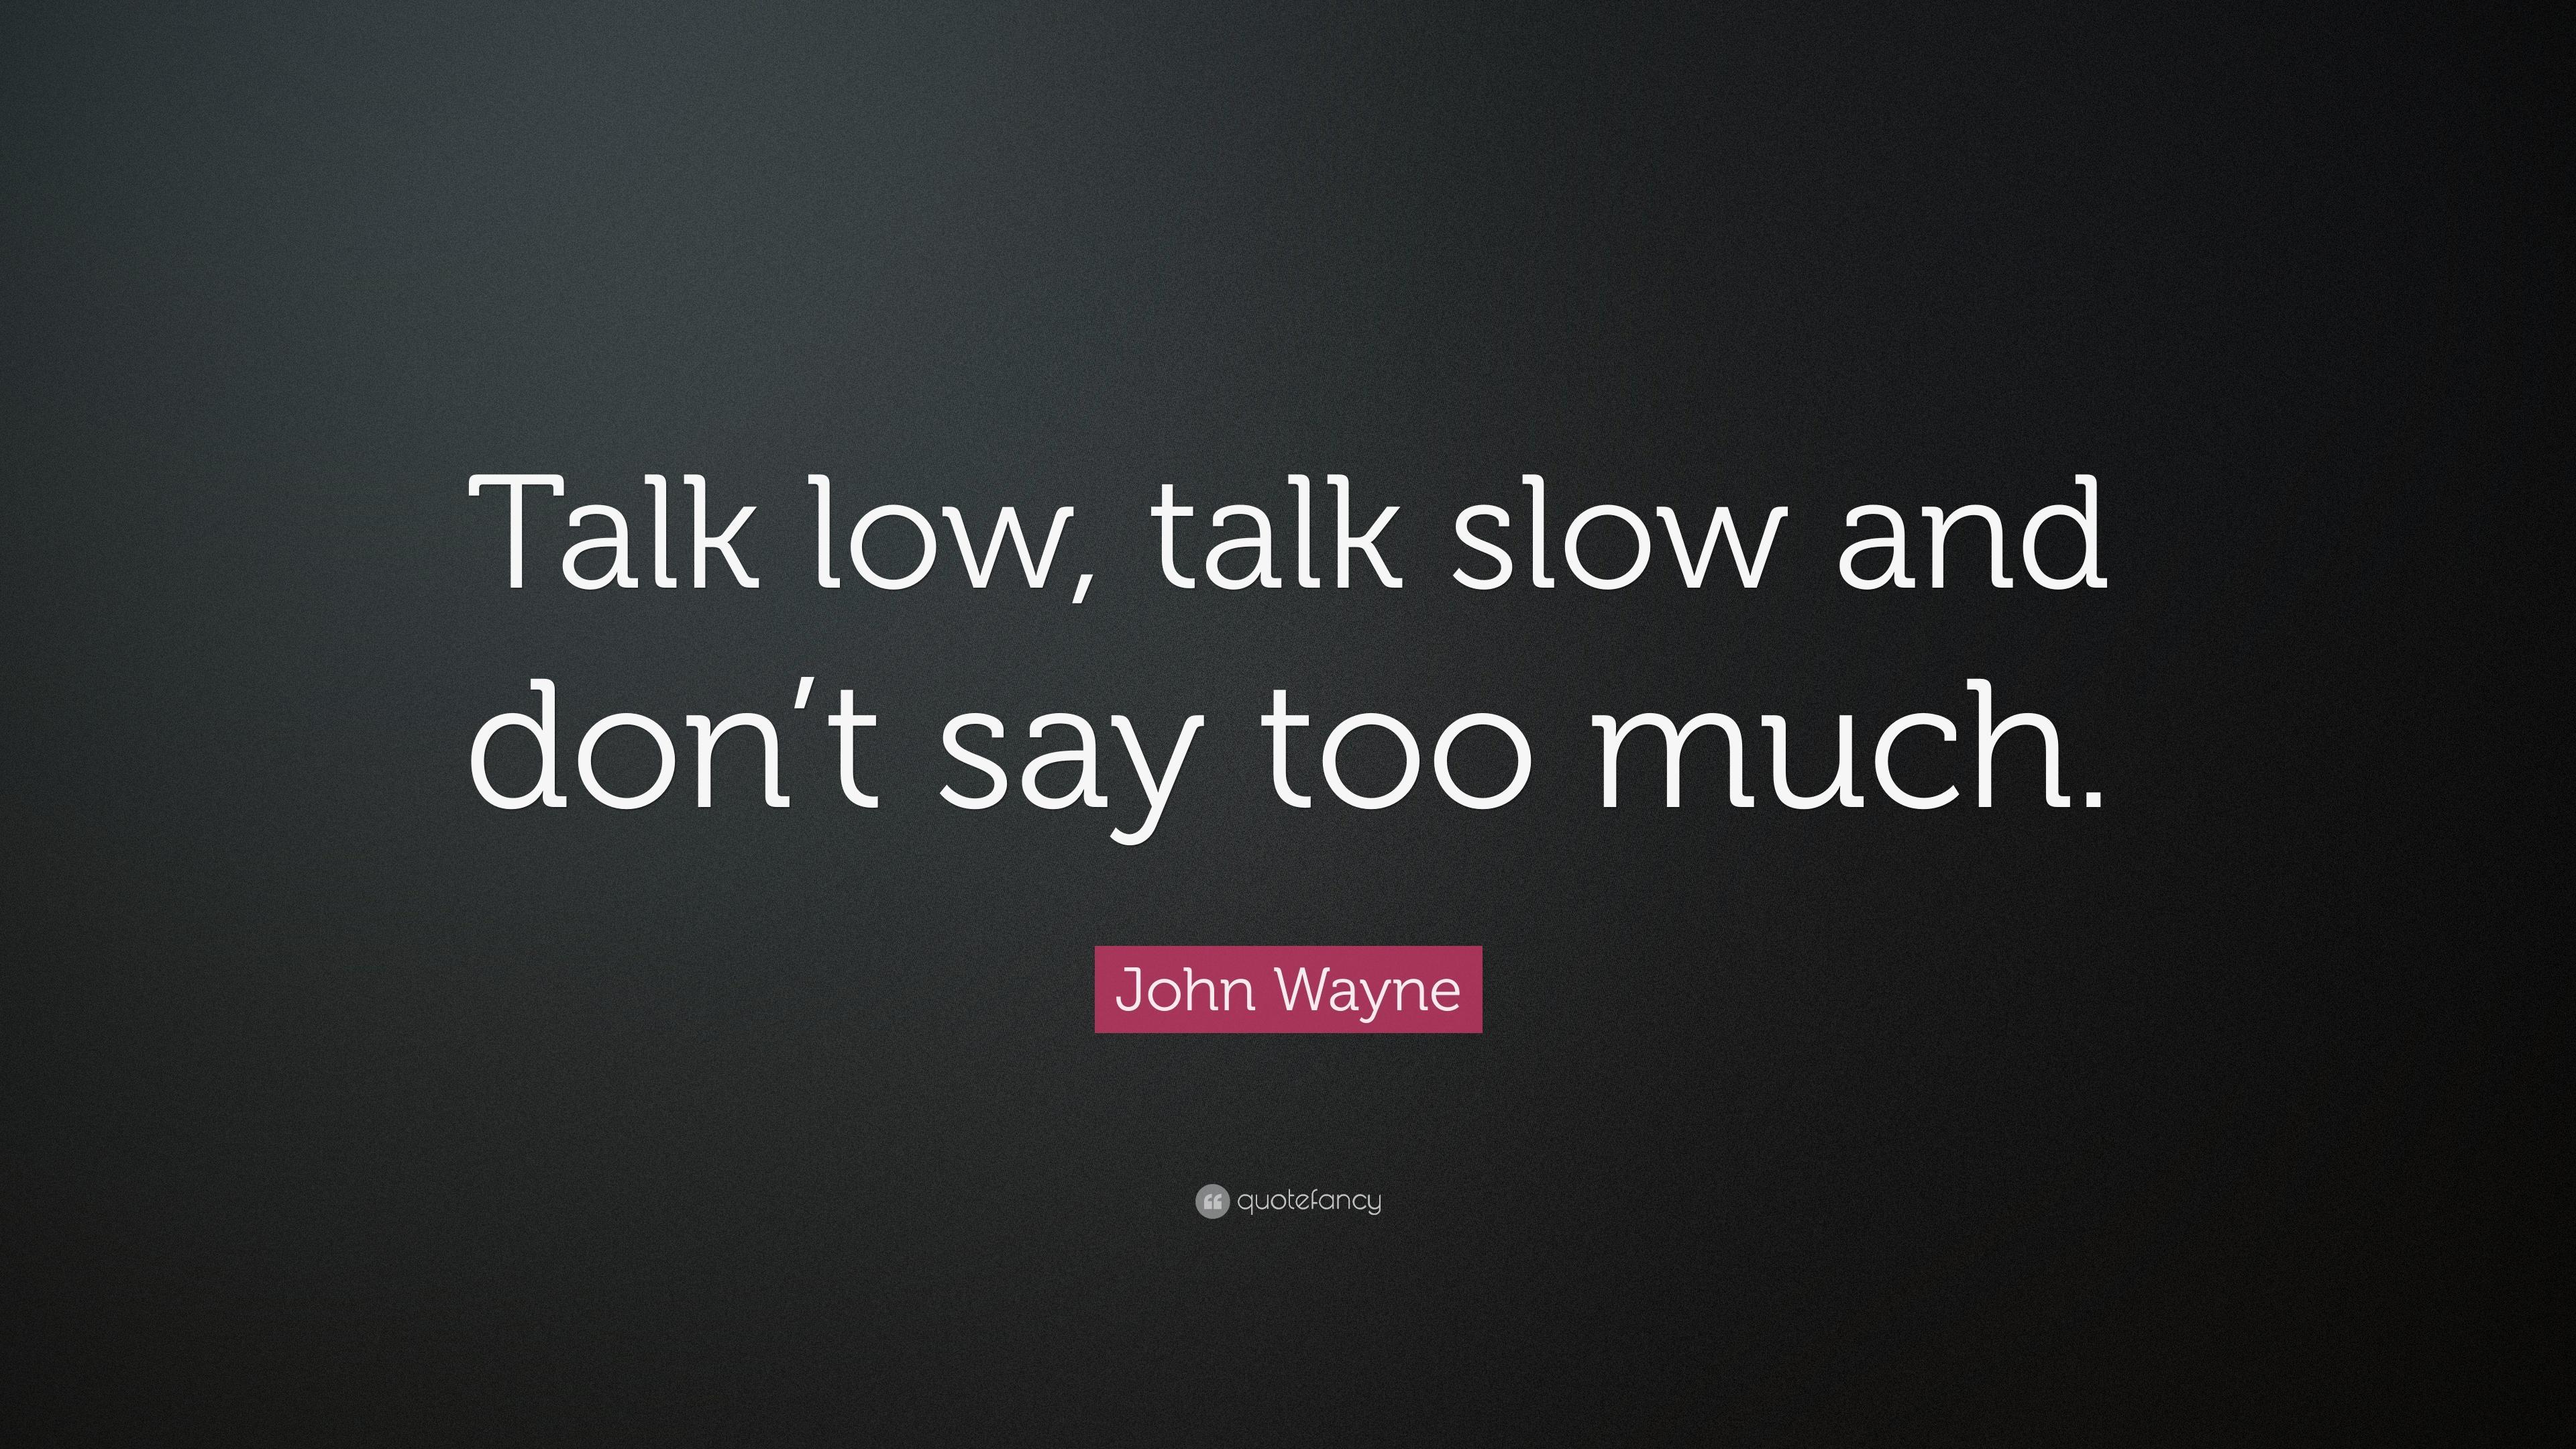 John Wayne Quote: “Talk low, talk slow and don't say too much.” 12